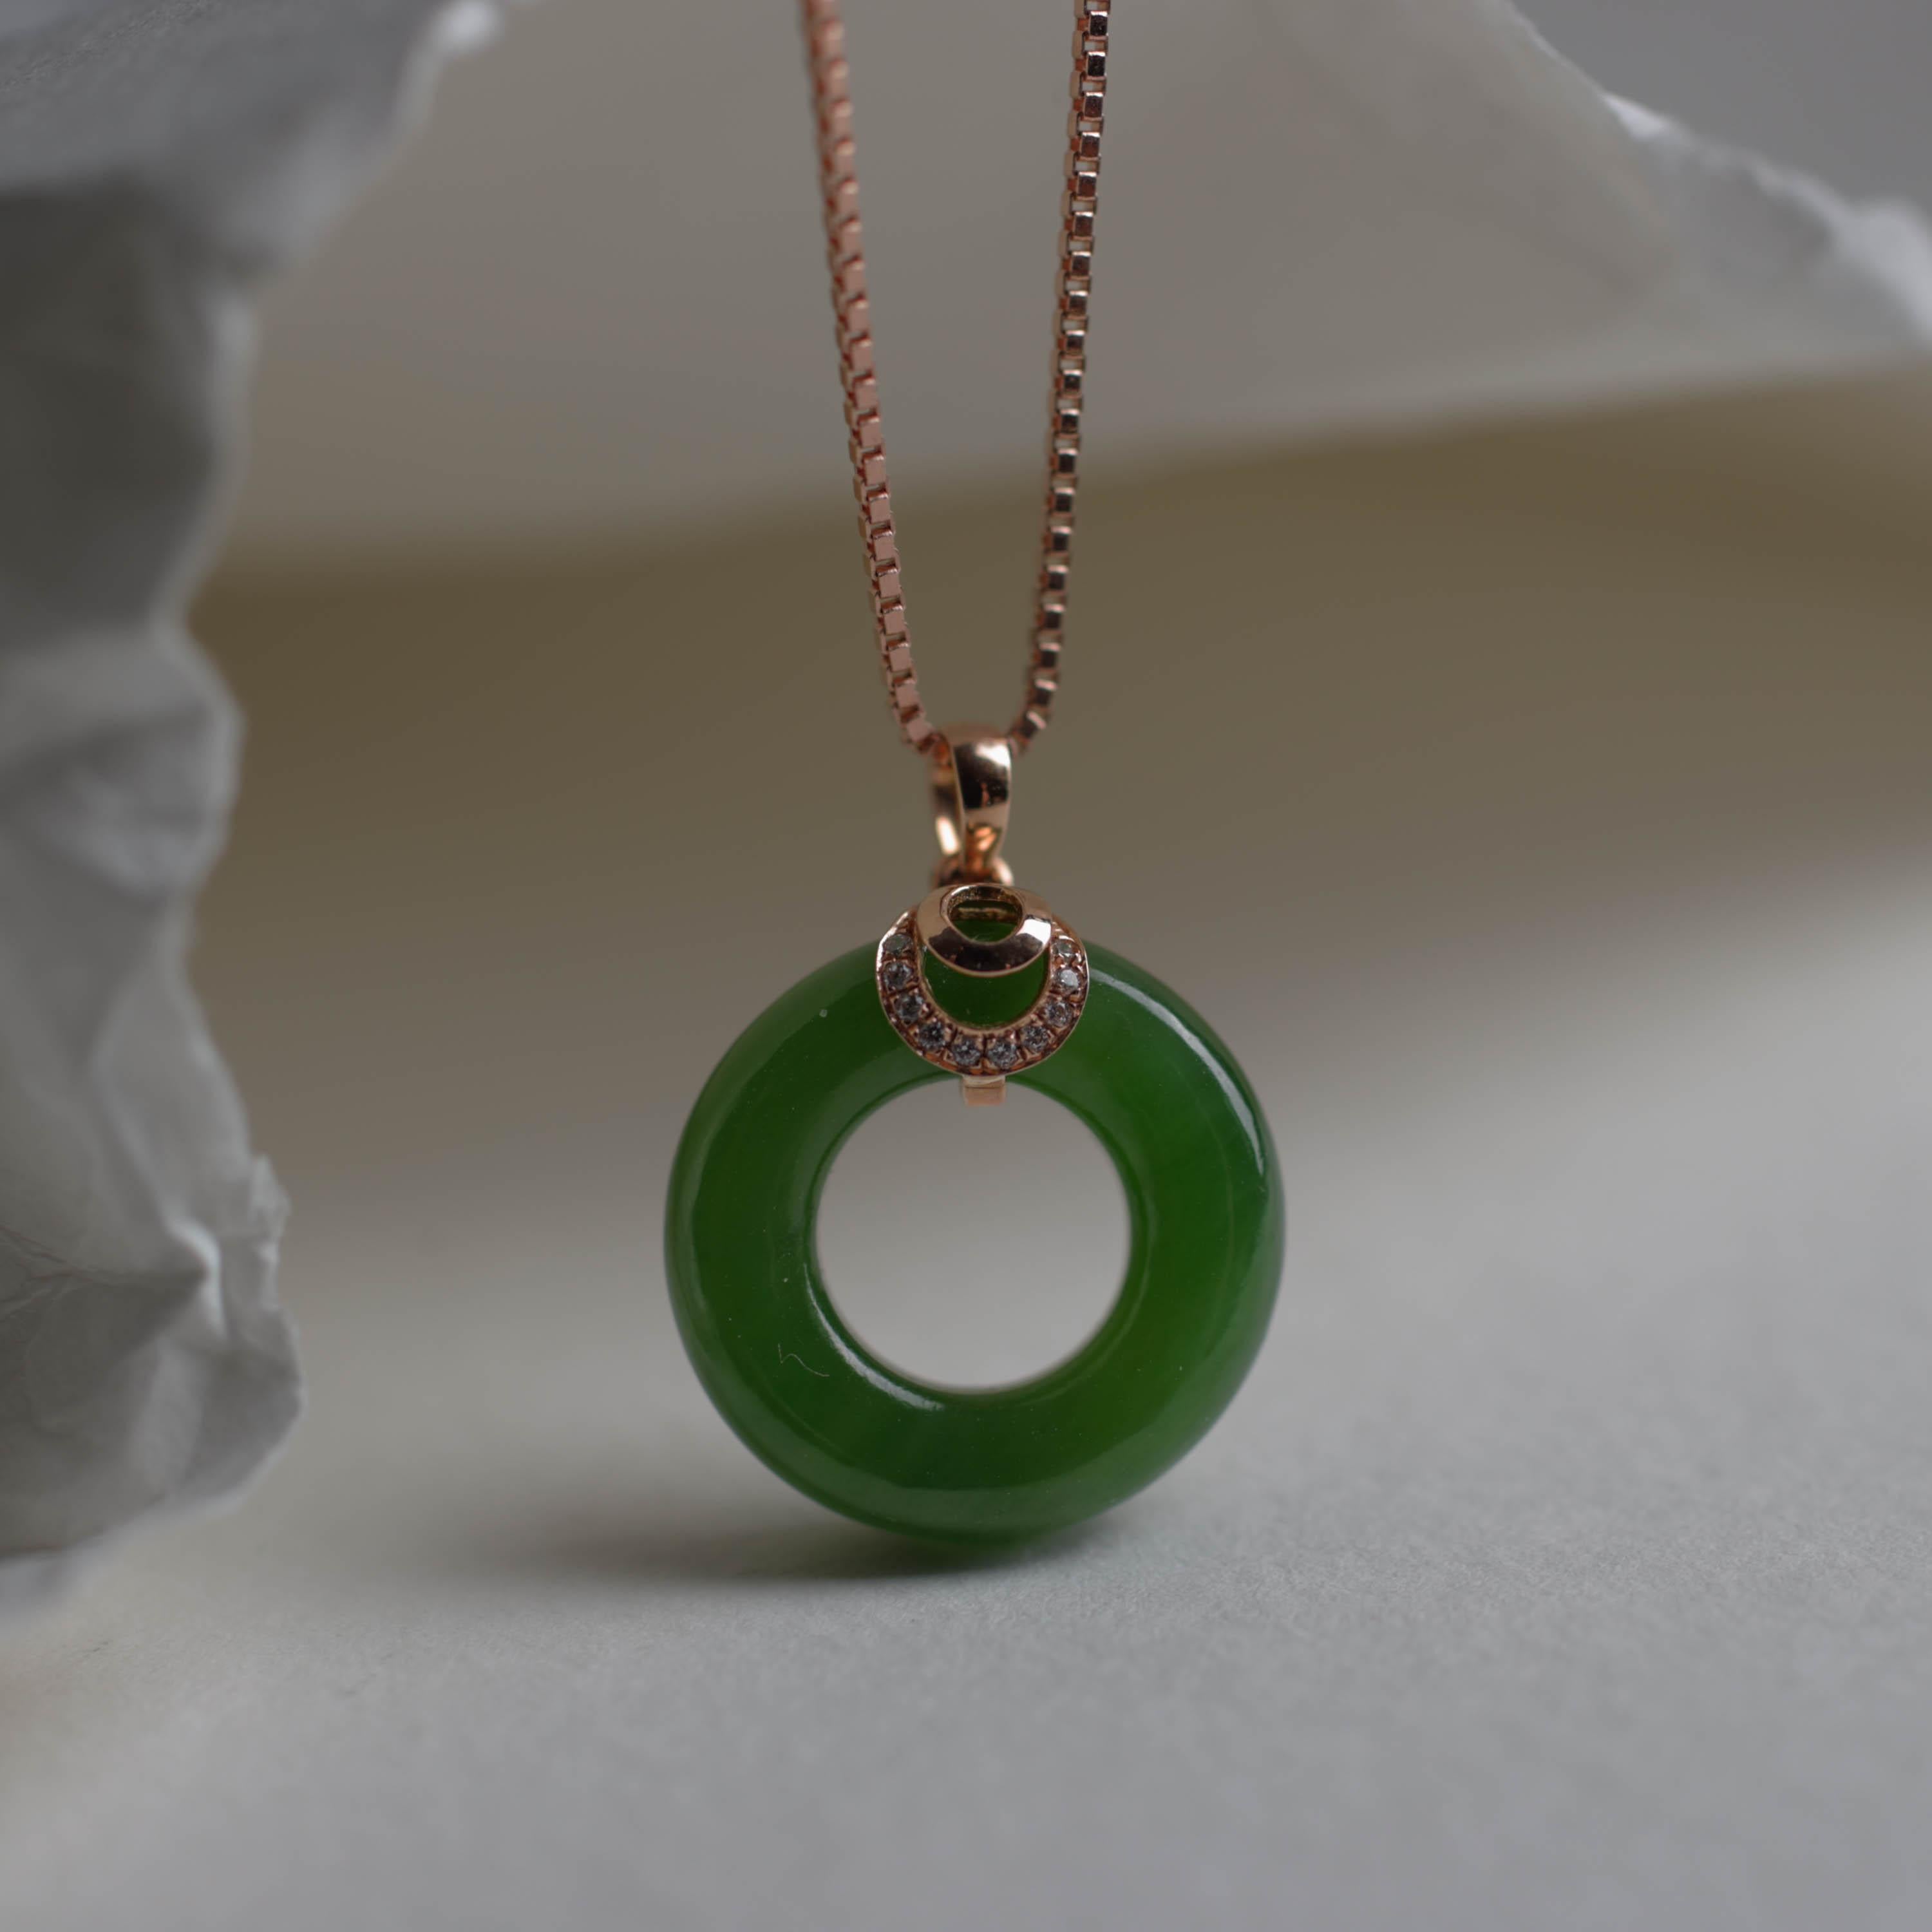 This ring-shaped hand-carved pendant features the finest green nephrite jade there is. This Chinese nephrite comes from the North-Western mountains of China and the nephrite features uncommonly pure apple-green coloring, together with extraordinary